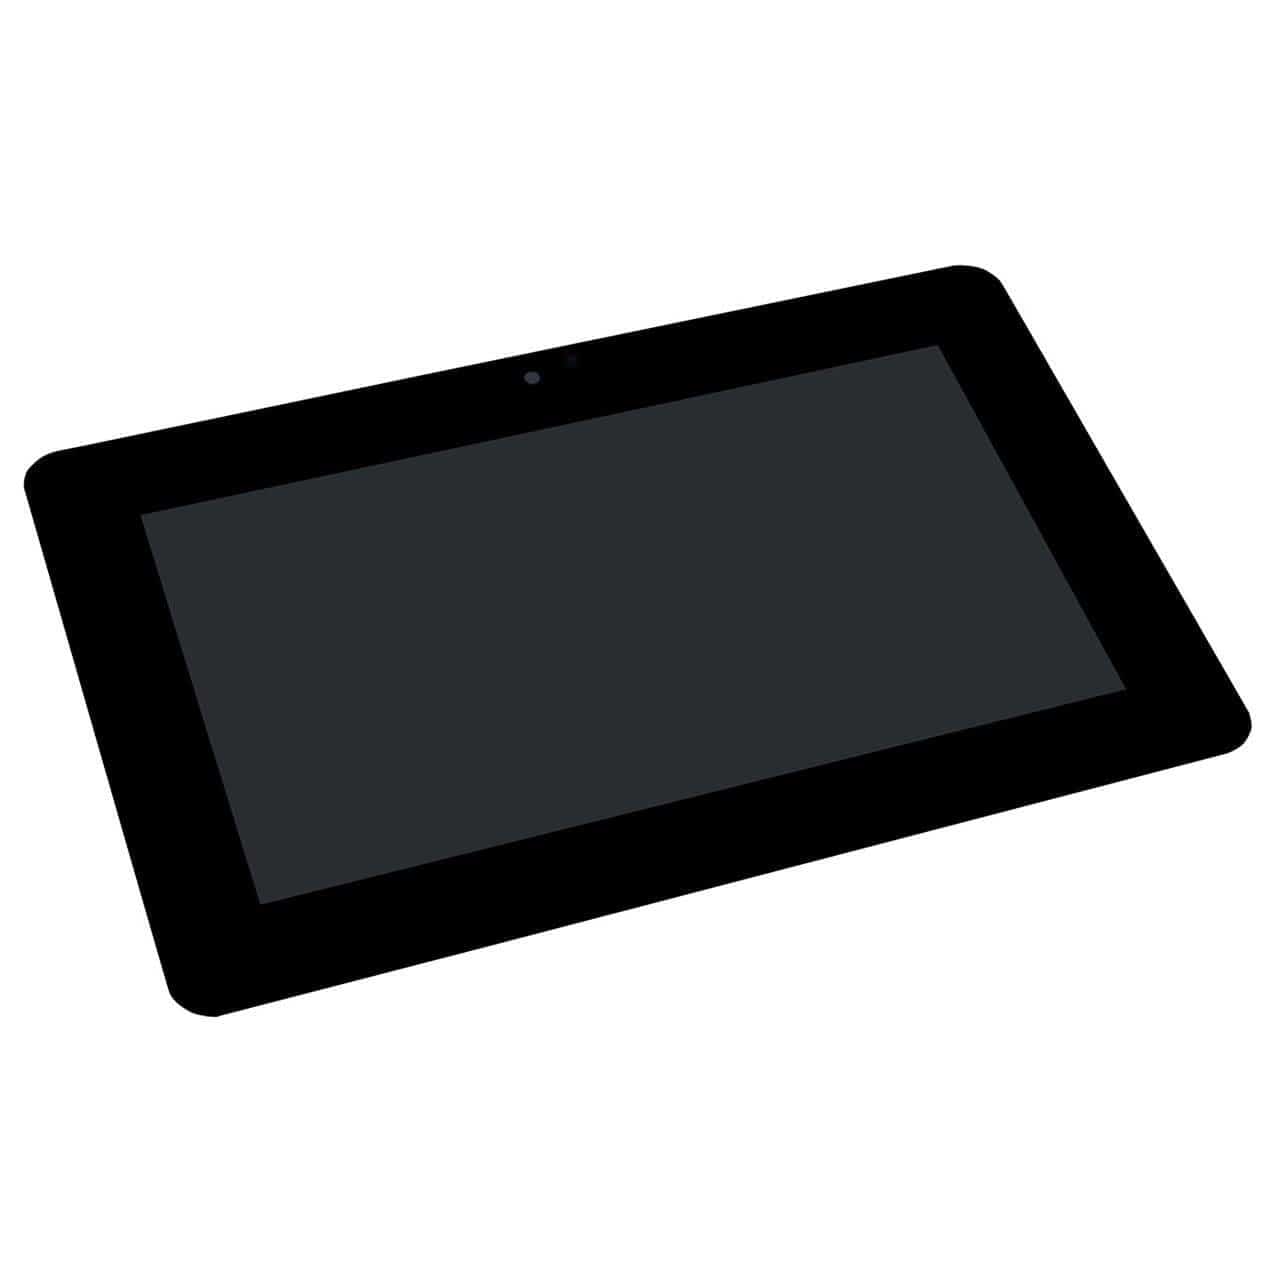 8" DSI Capacitive Touch Display for Raspberry Pi (800x480) - The Pi Hut